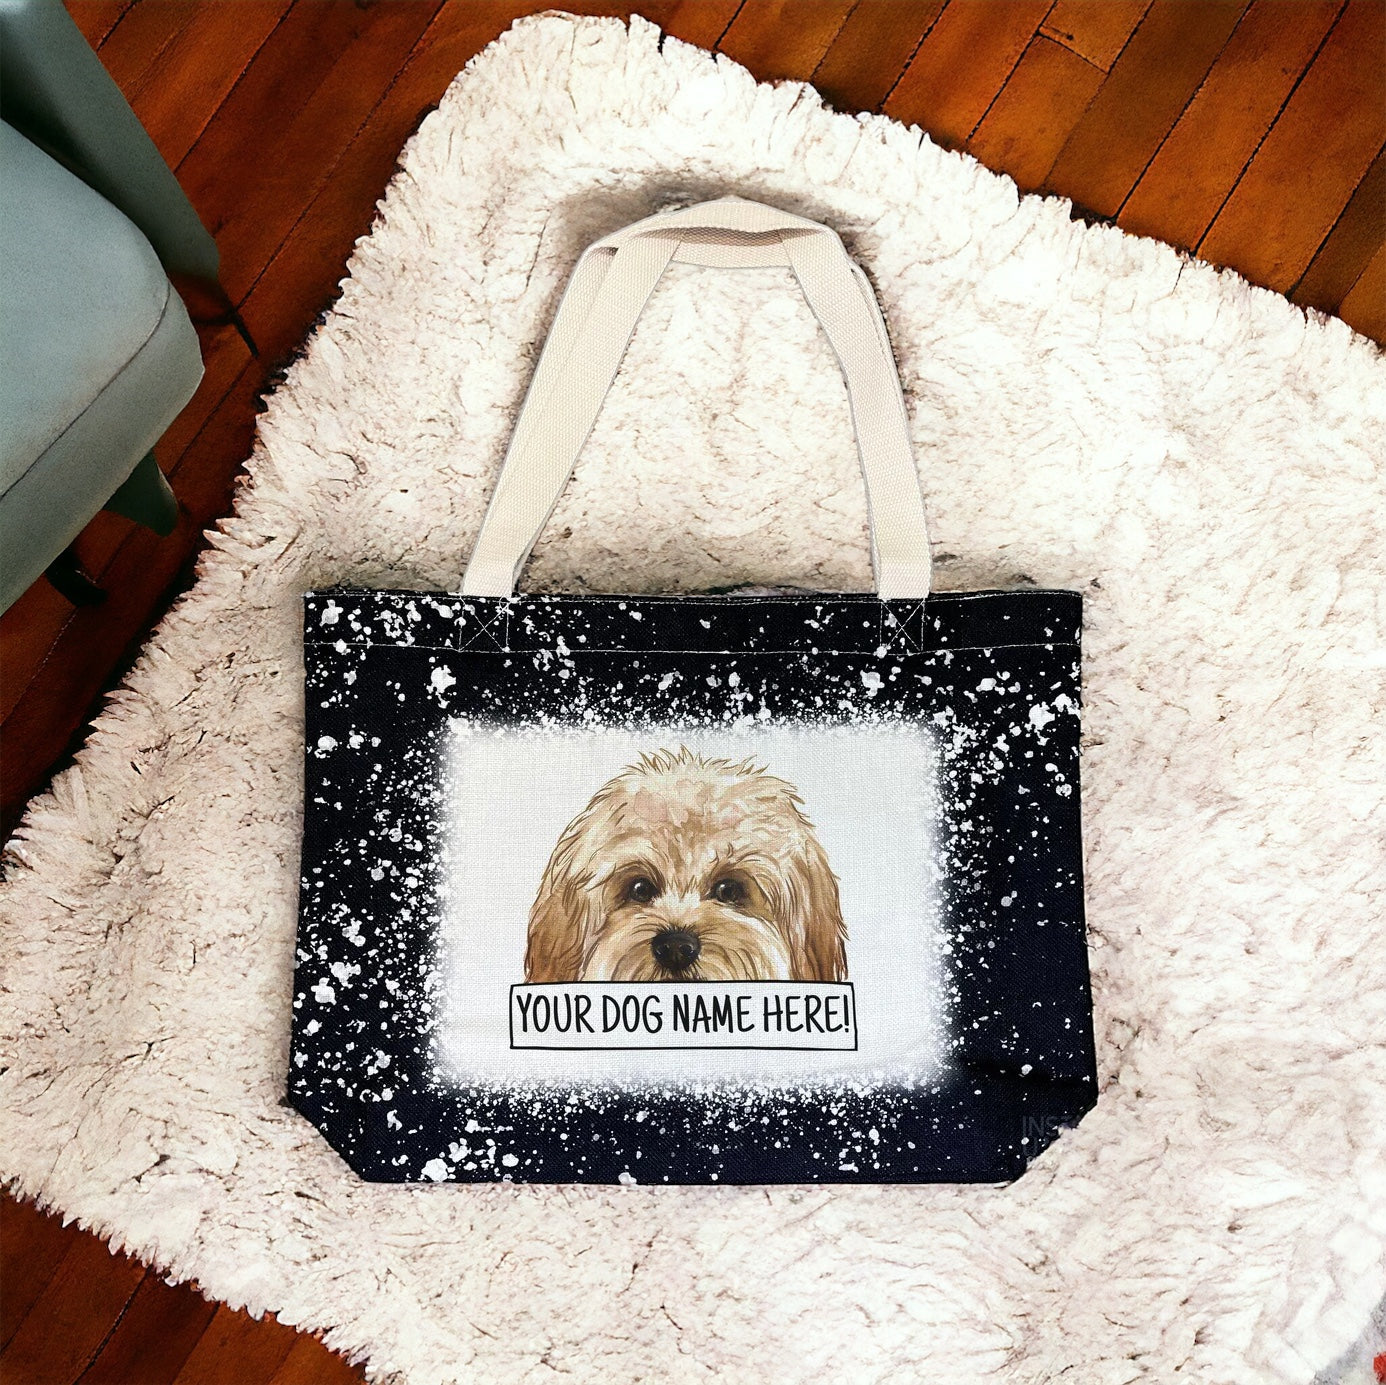 Add Your Dog Portrait and Name Custom Tote - Black Bleach Design Tote Bag